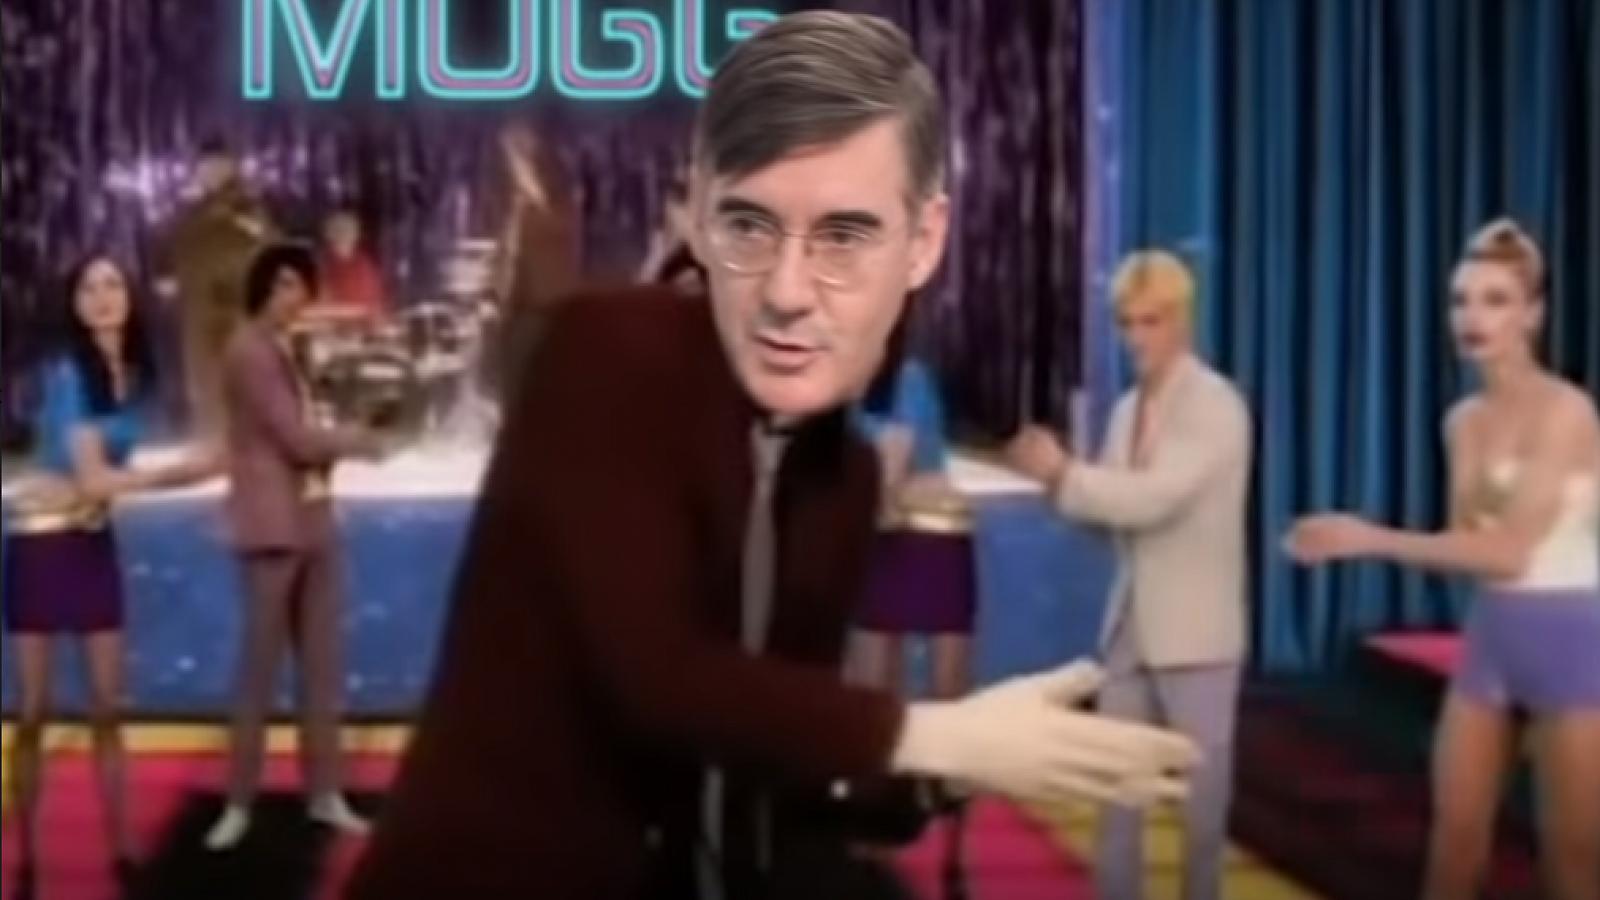 Making a Mogg-ery: The story behind the viral video that saw Jacob become Jarvis